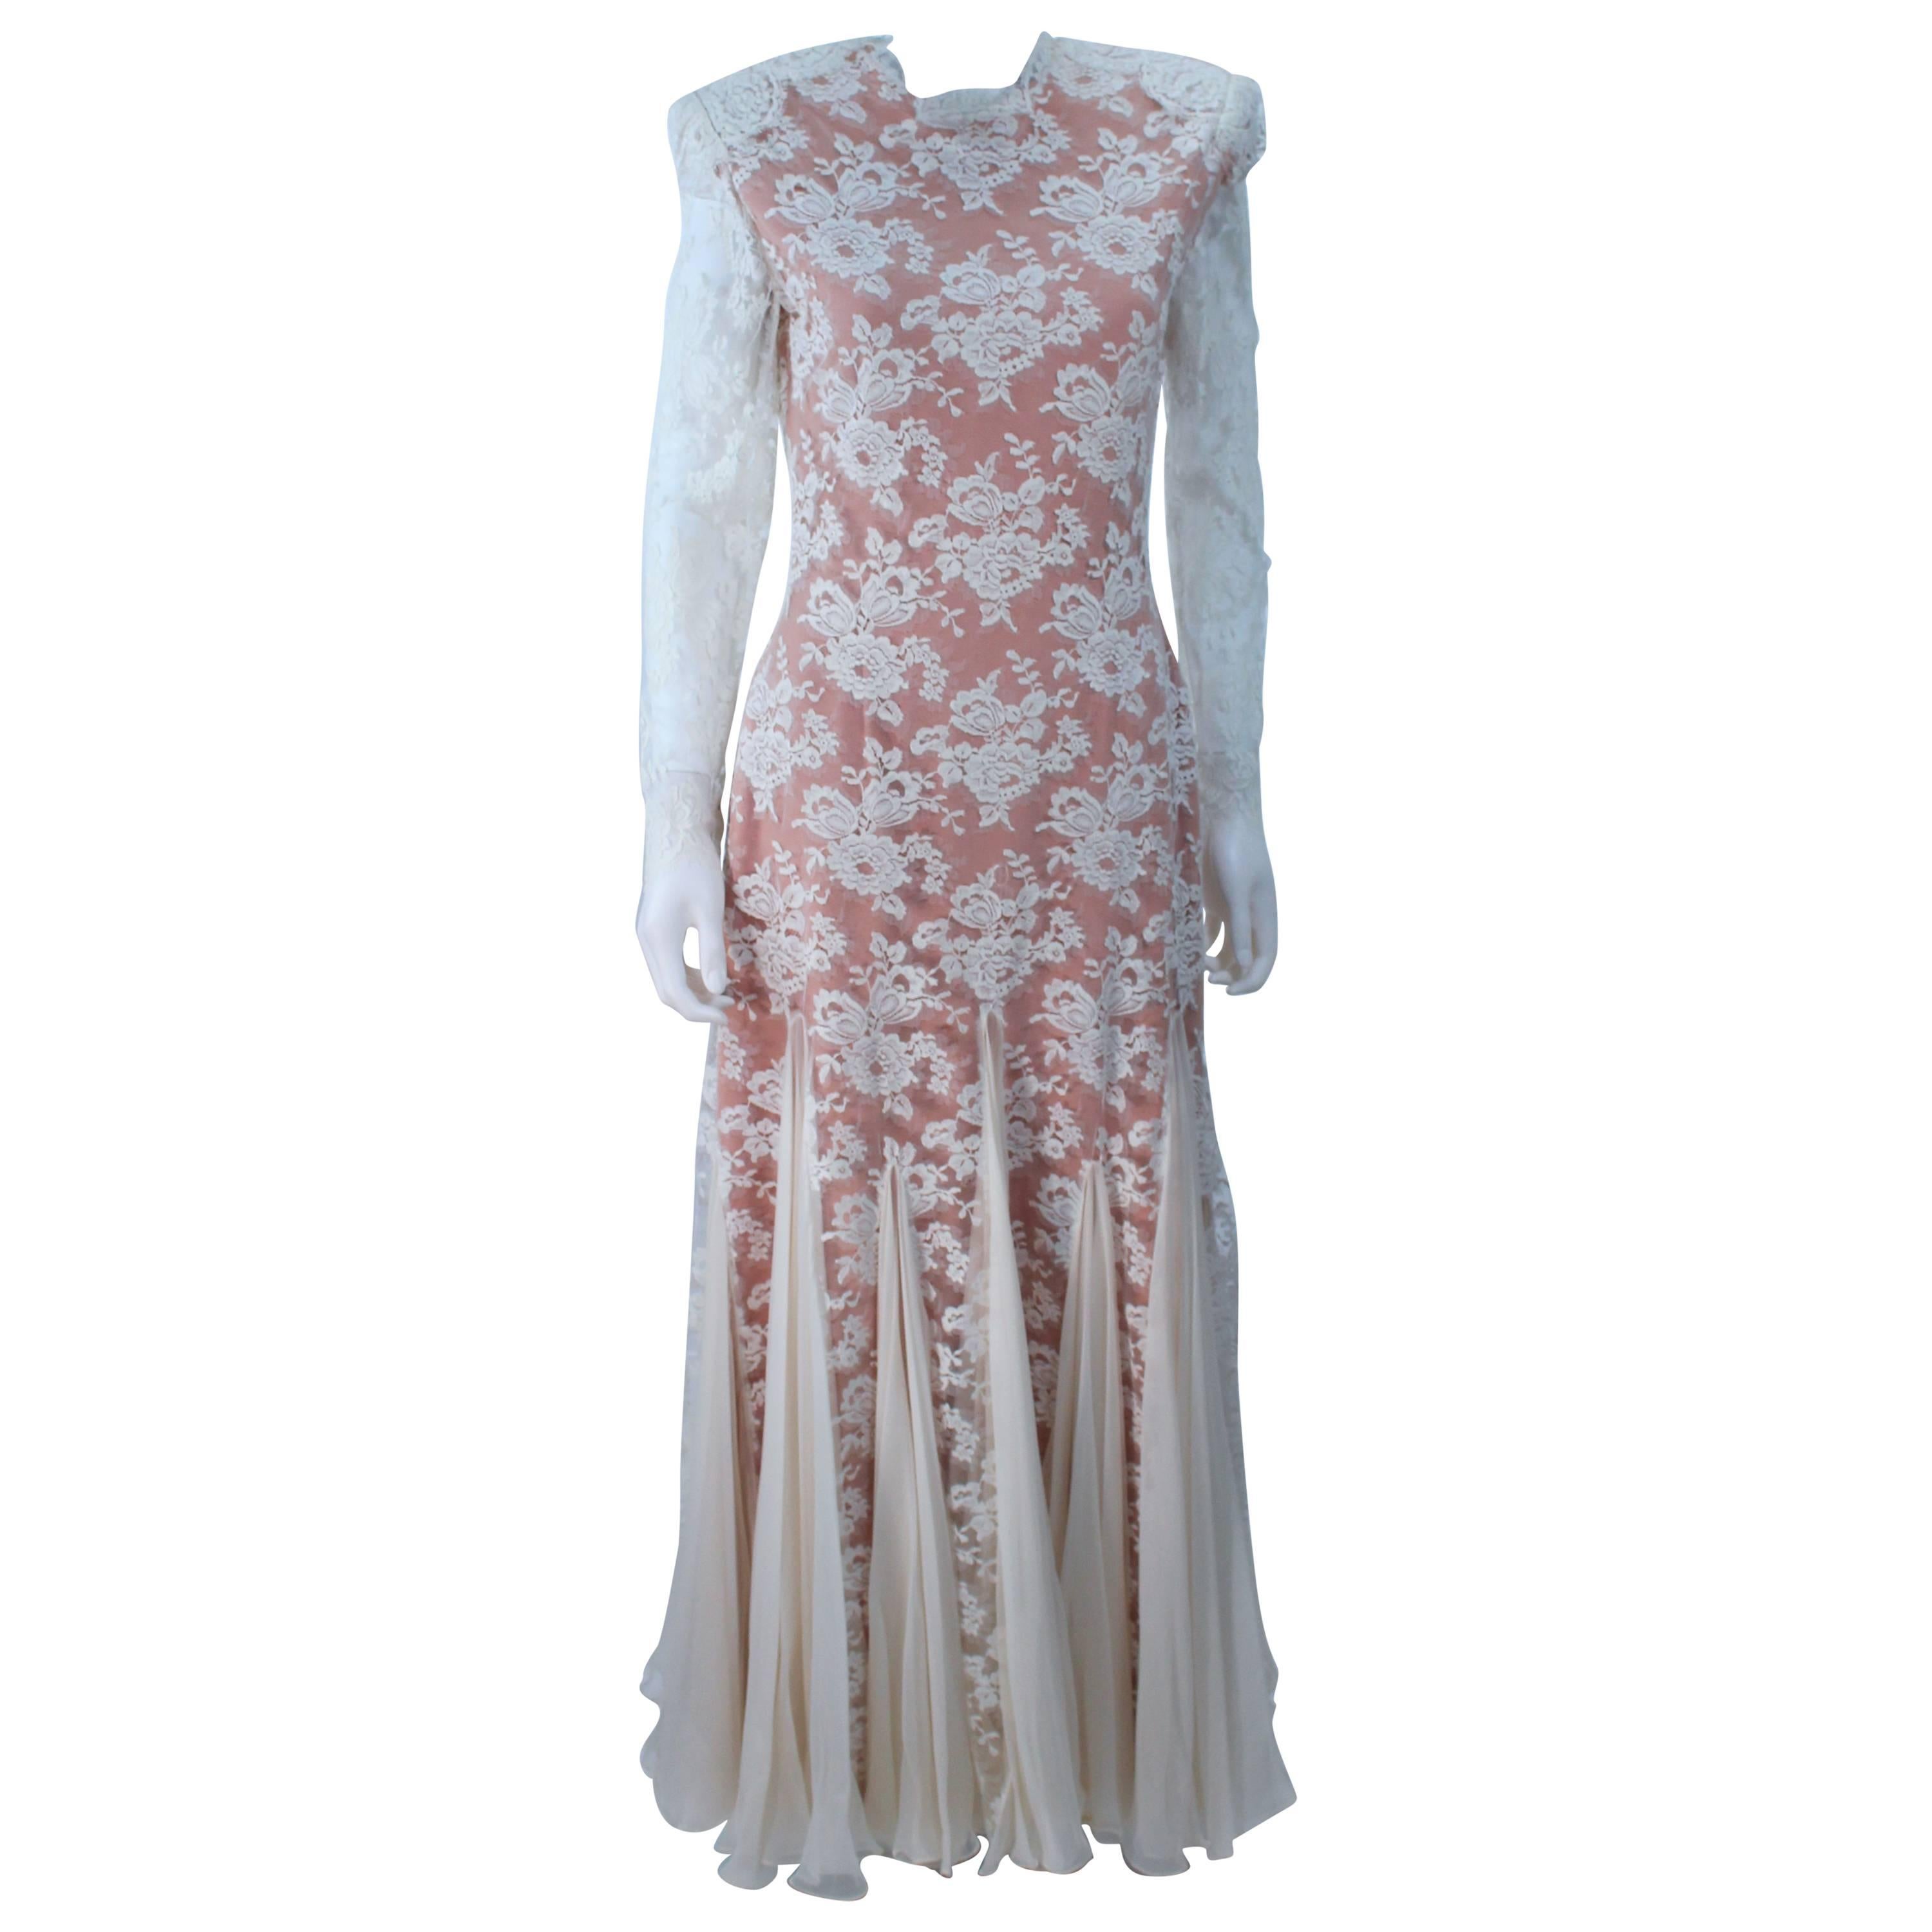 TRAVILLA Lace Gown with Nude Underlay Size 4 6 For Sale